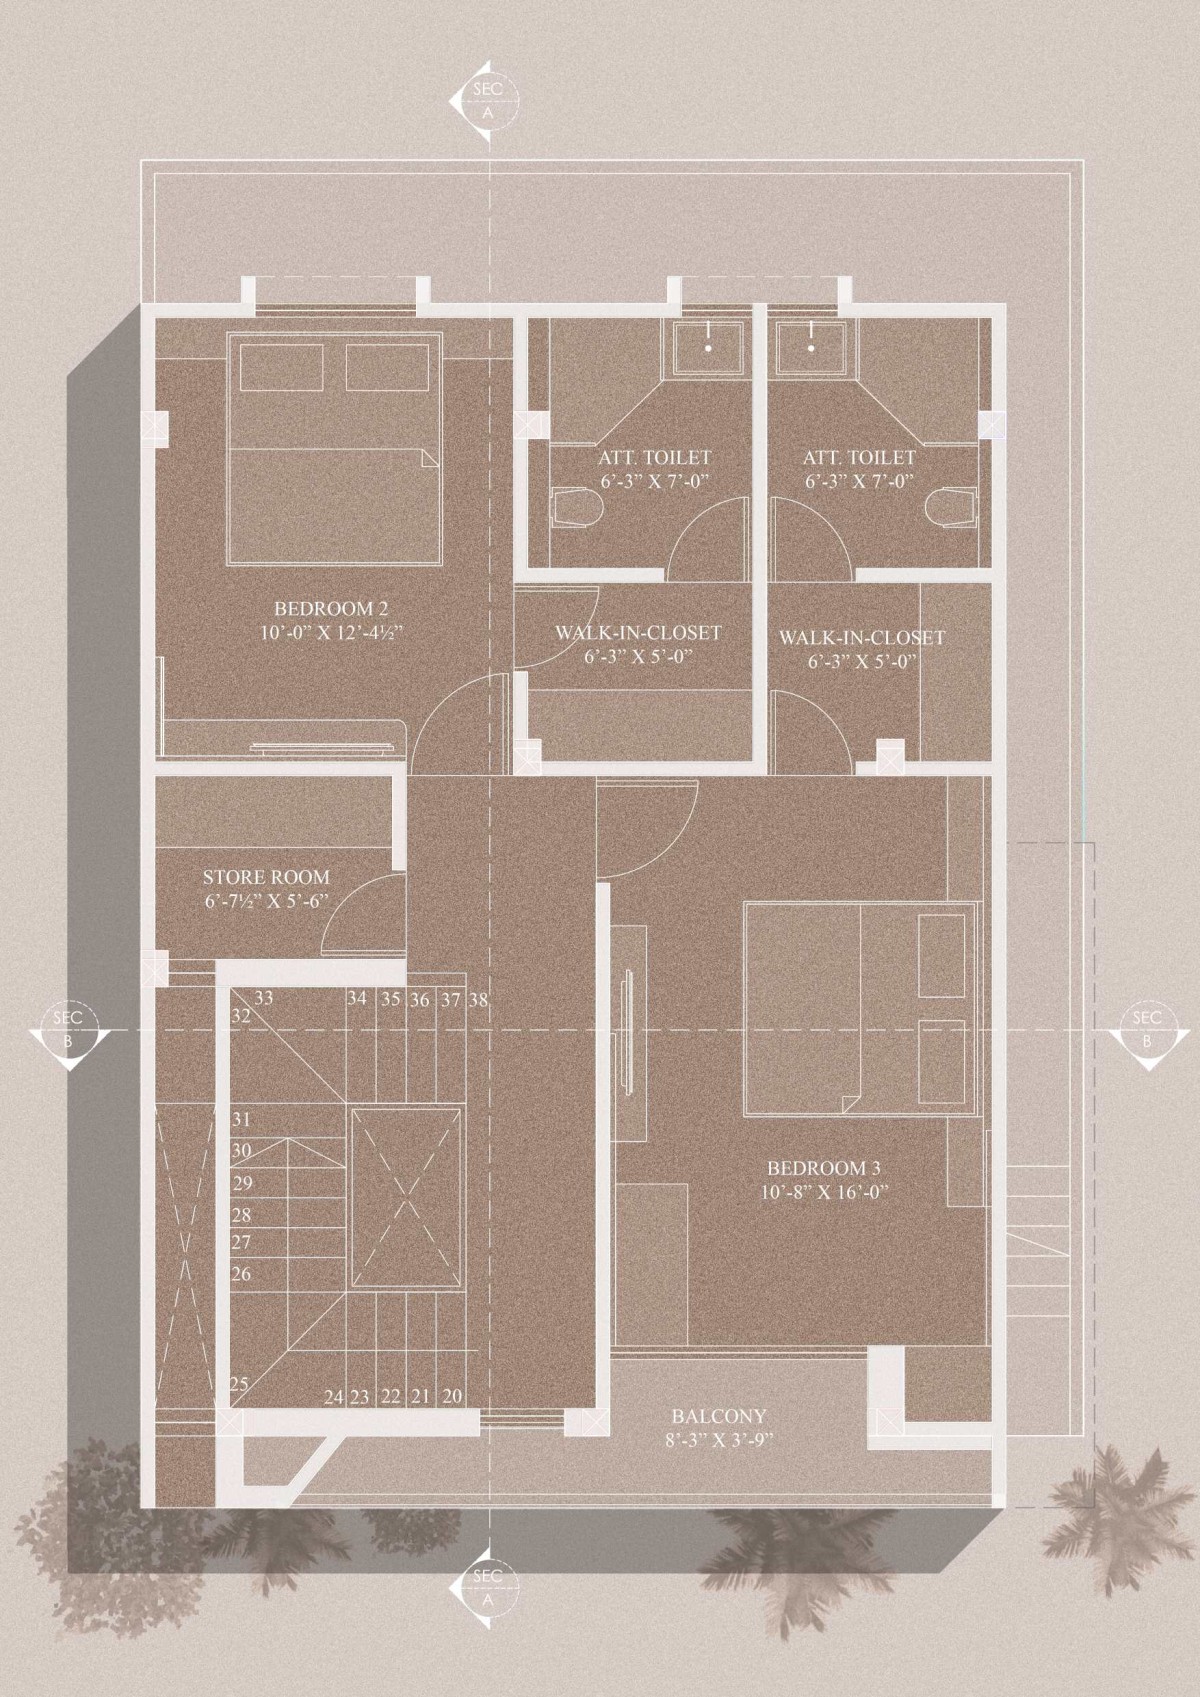 First floor plan of Parekh's Residence by J Architects